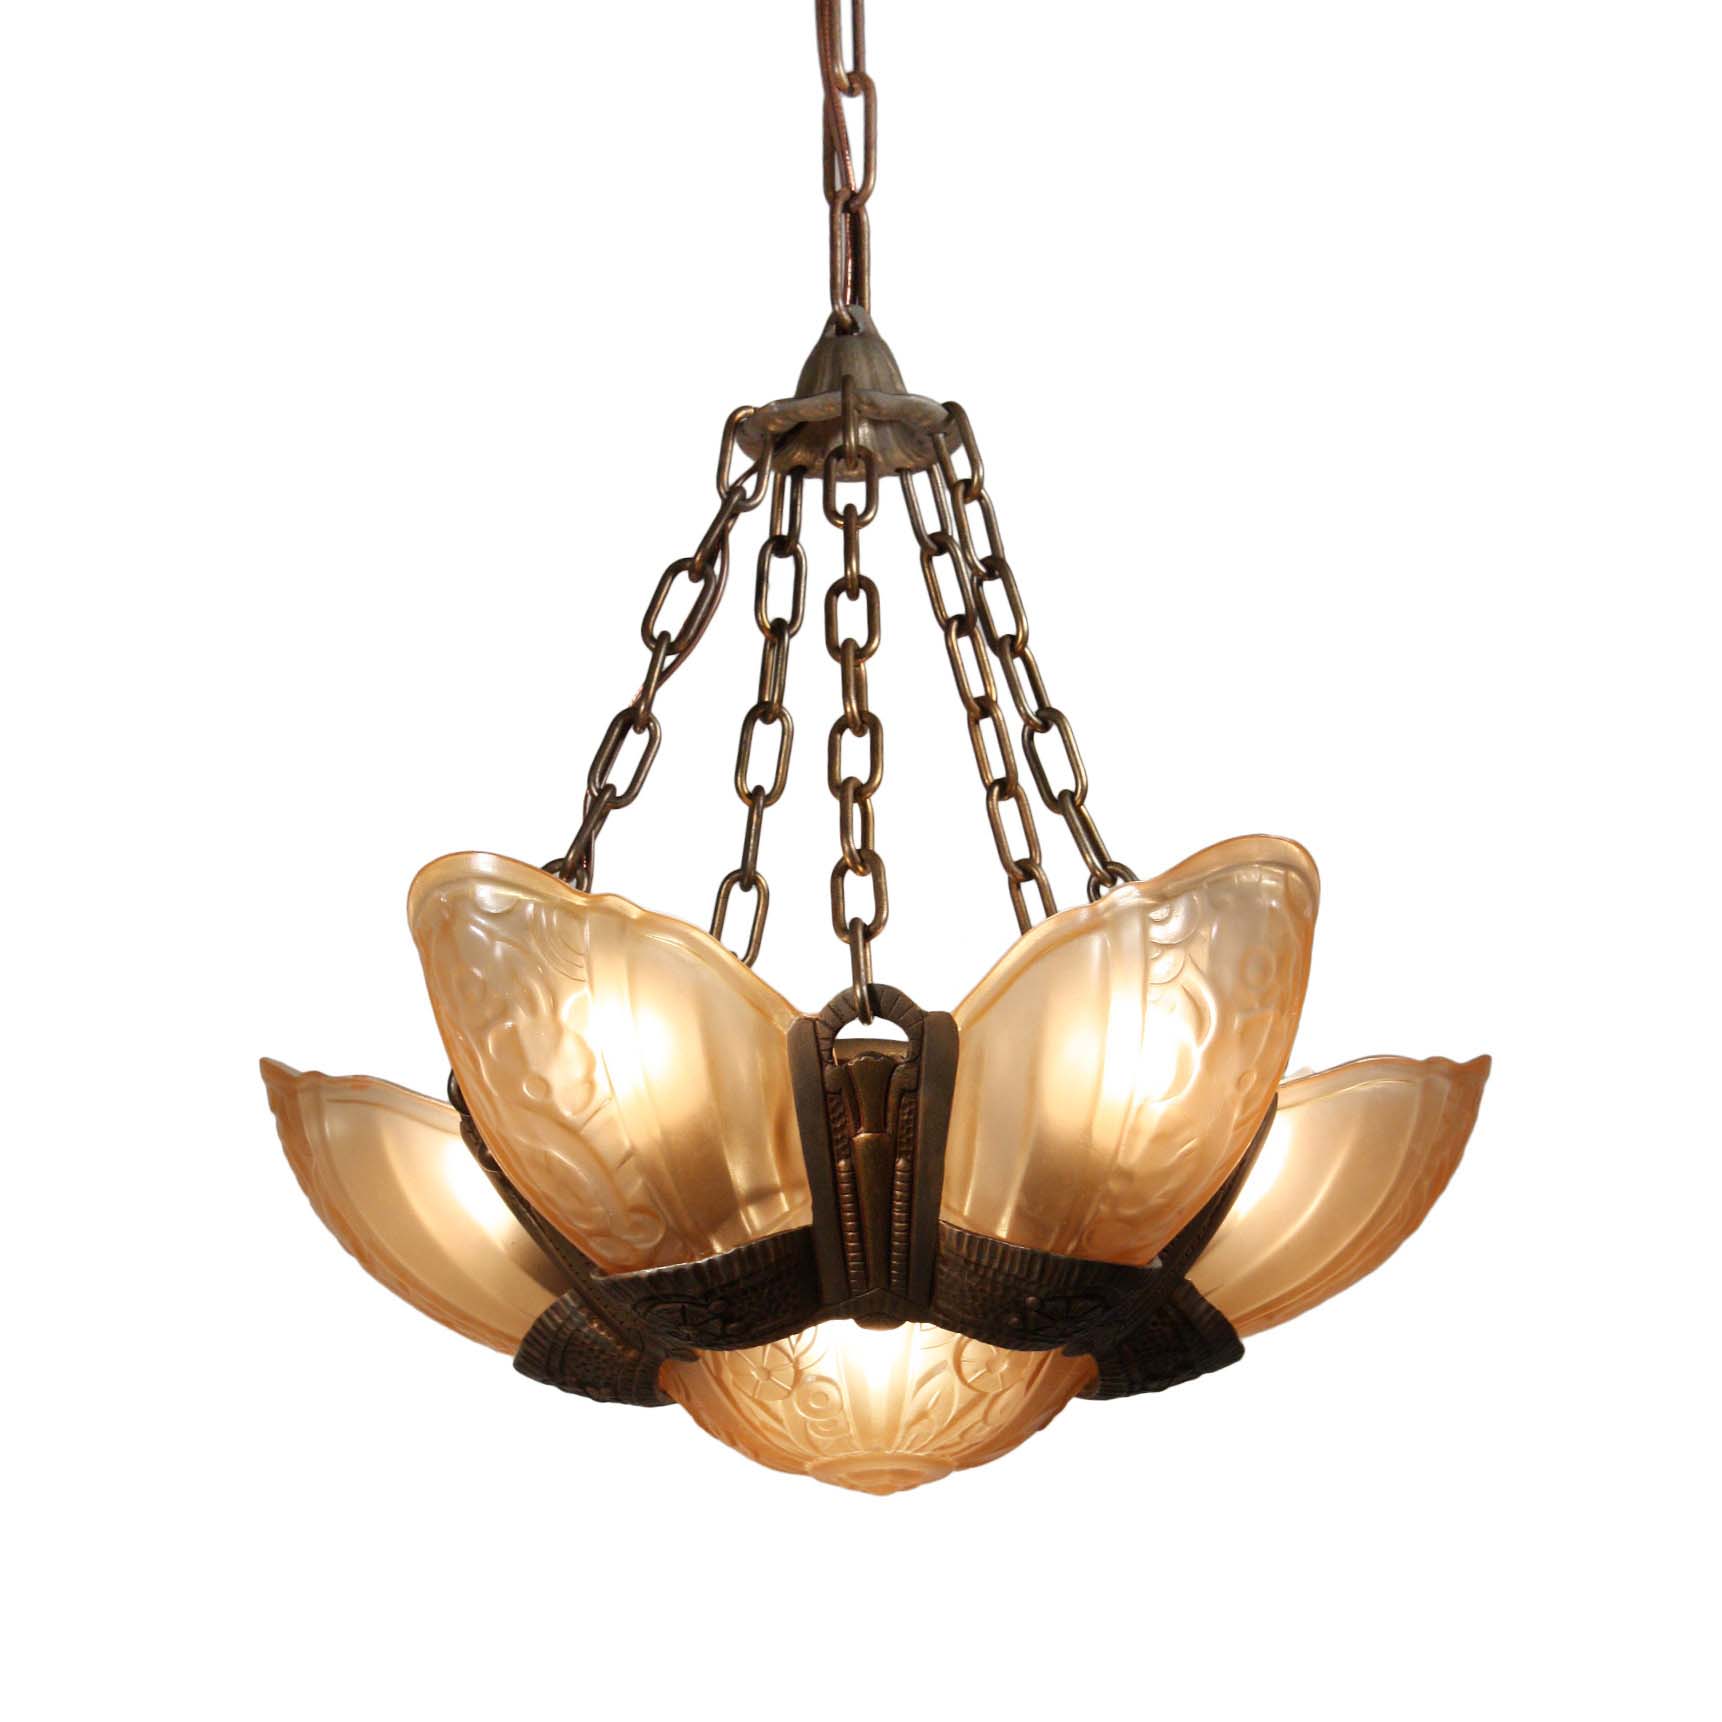 Art Deco Slip Shade Chandelier by Lincoln, Antique Lighting-0